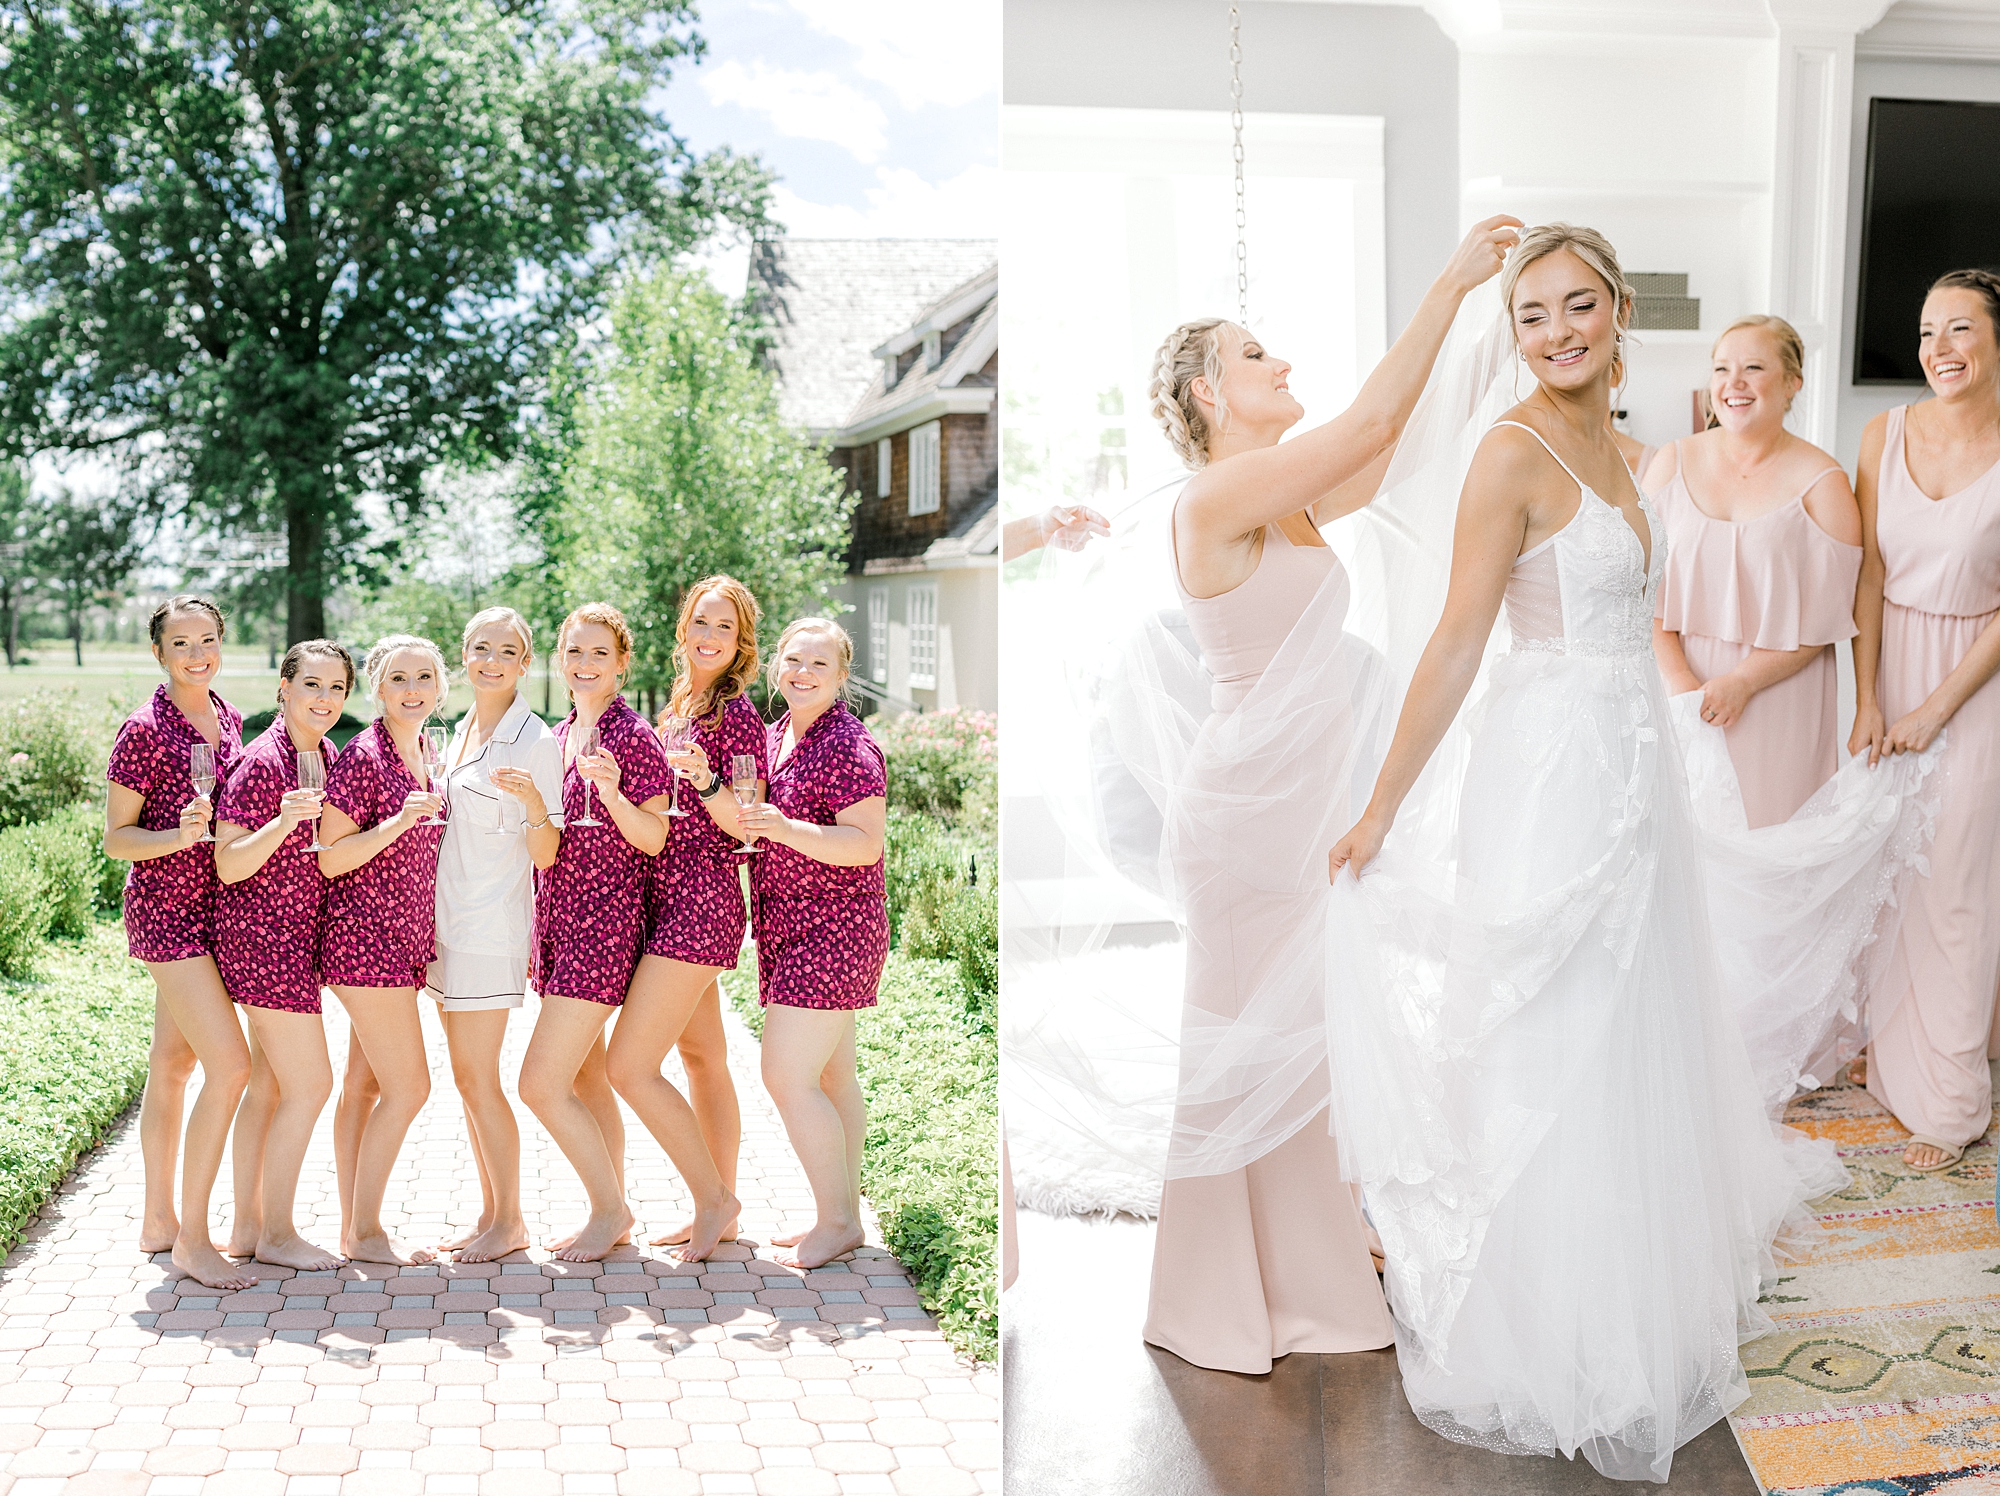 bridesmaids pose in matching pink robes and help bride with veil